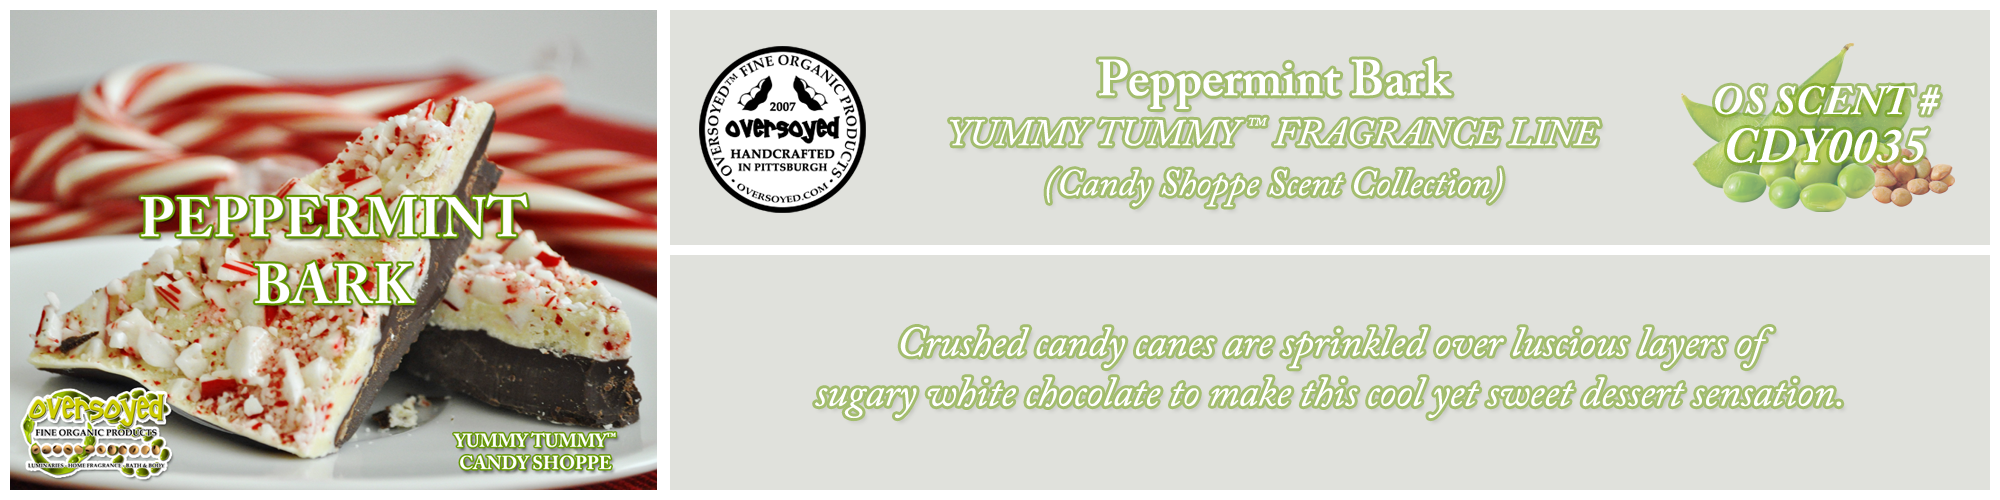 Peppermint Bark Handcrafted Products Collection